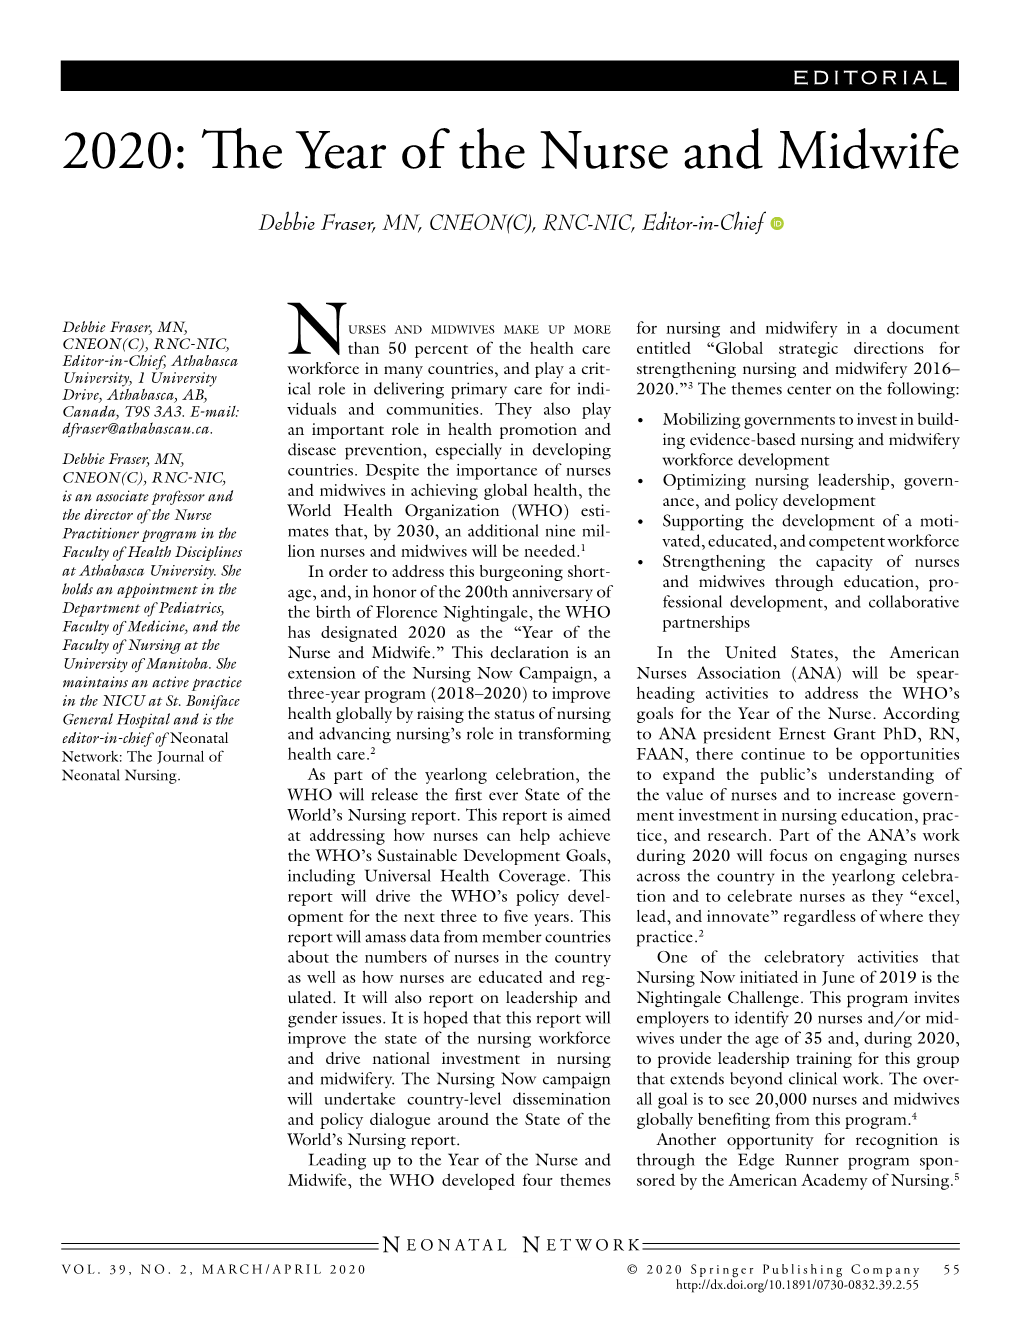 2020: the Year of the Nurse and Midwife